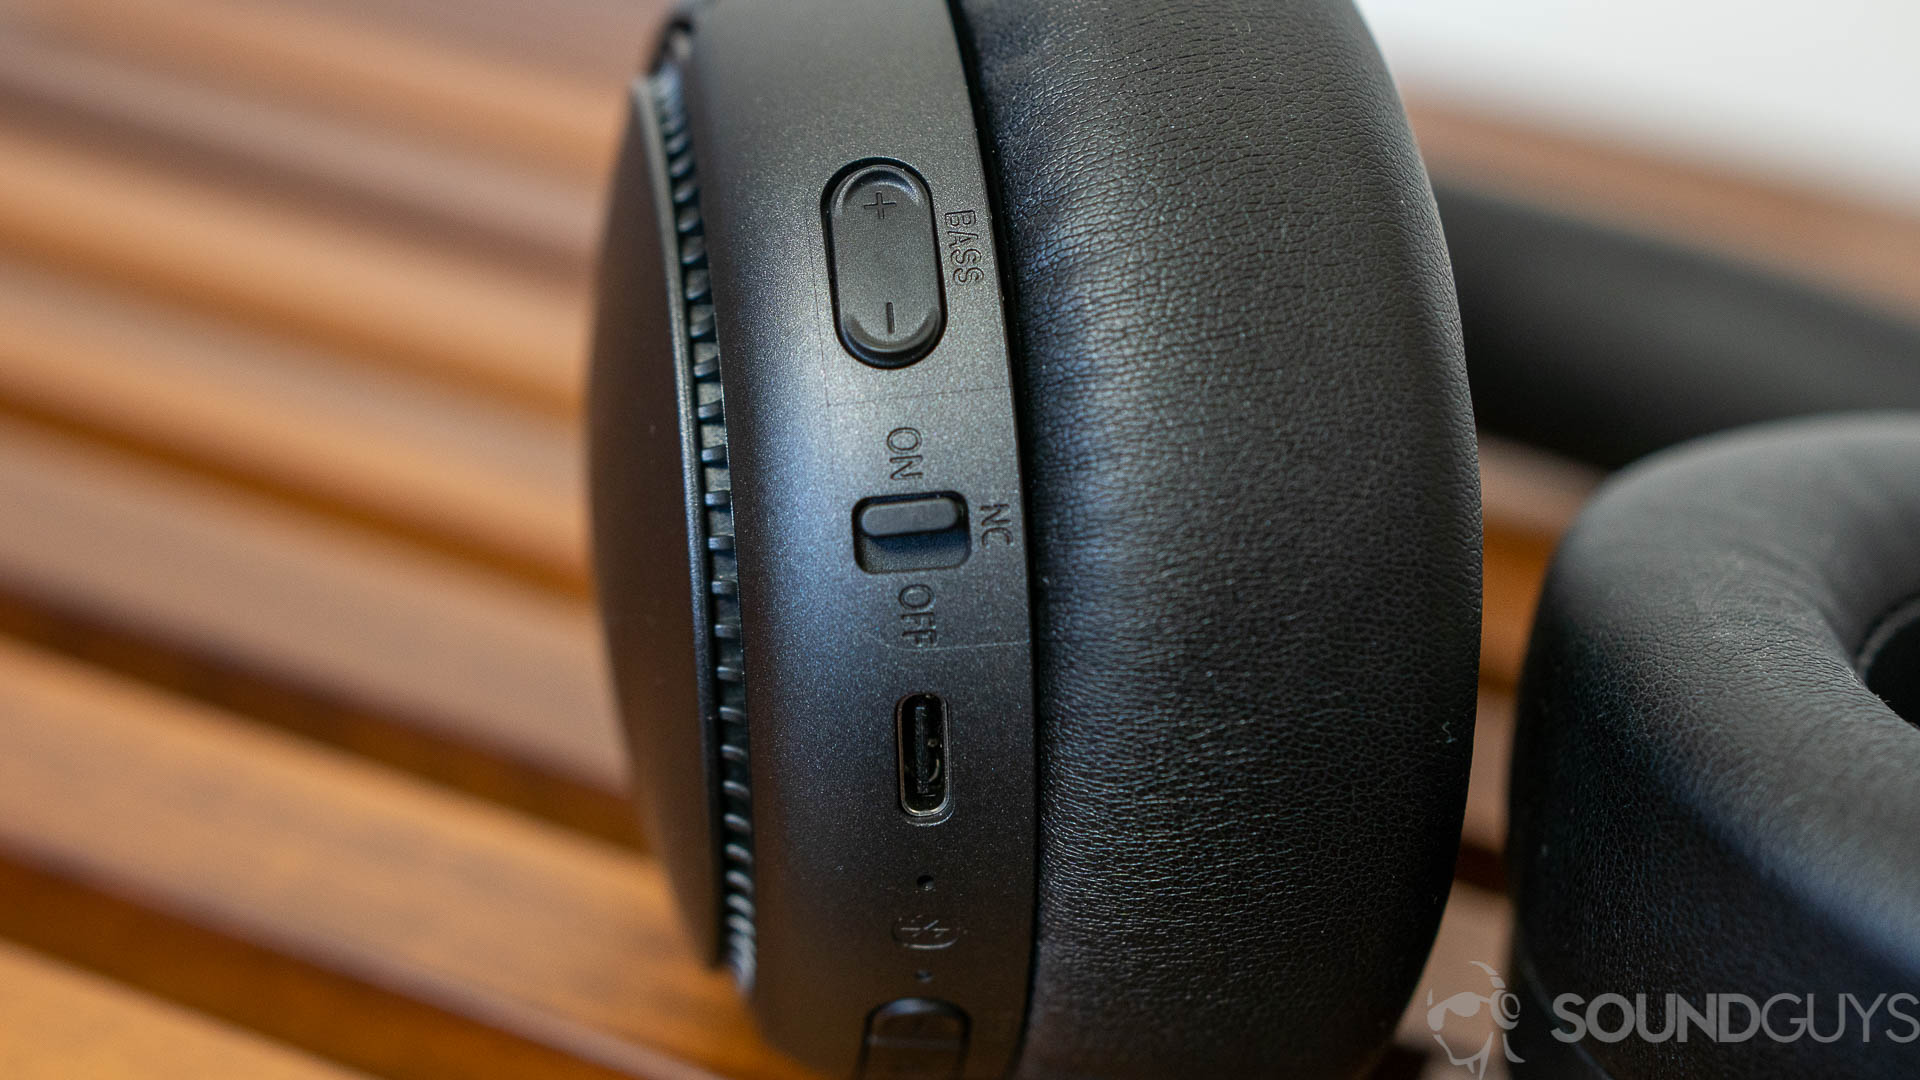 Close-up of the bass reactor button on the Panasonic RB-M700B headphones on a wooden bench.